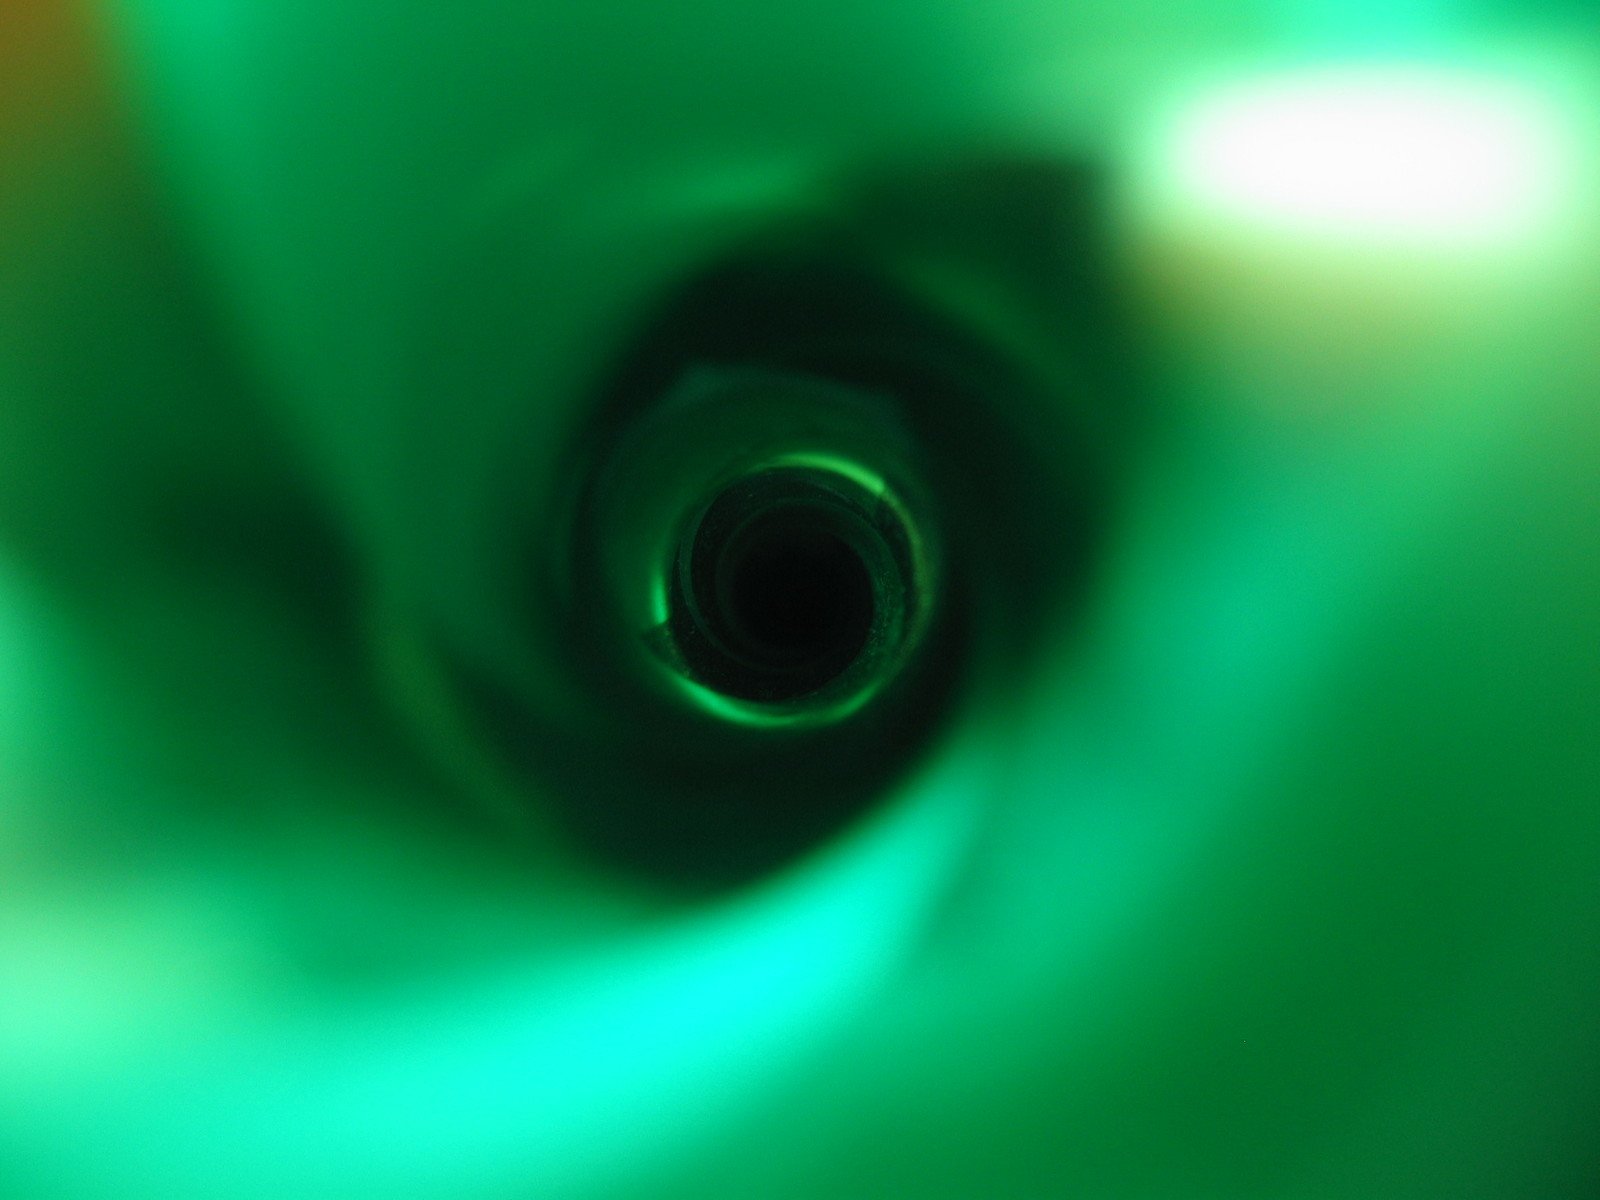 looking down at a green spiral shape made from a black pipe